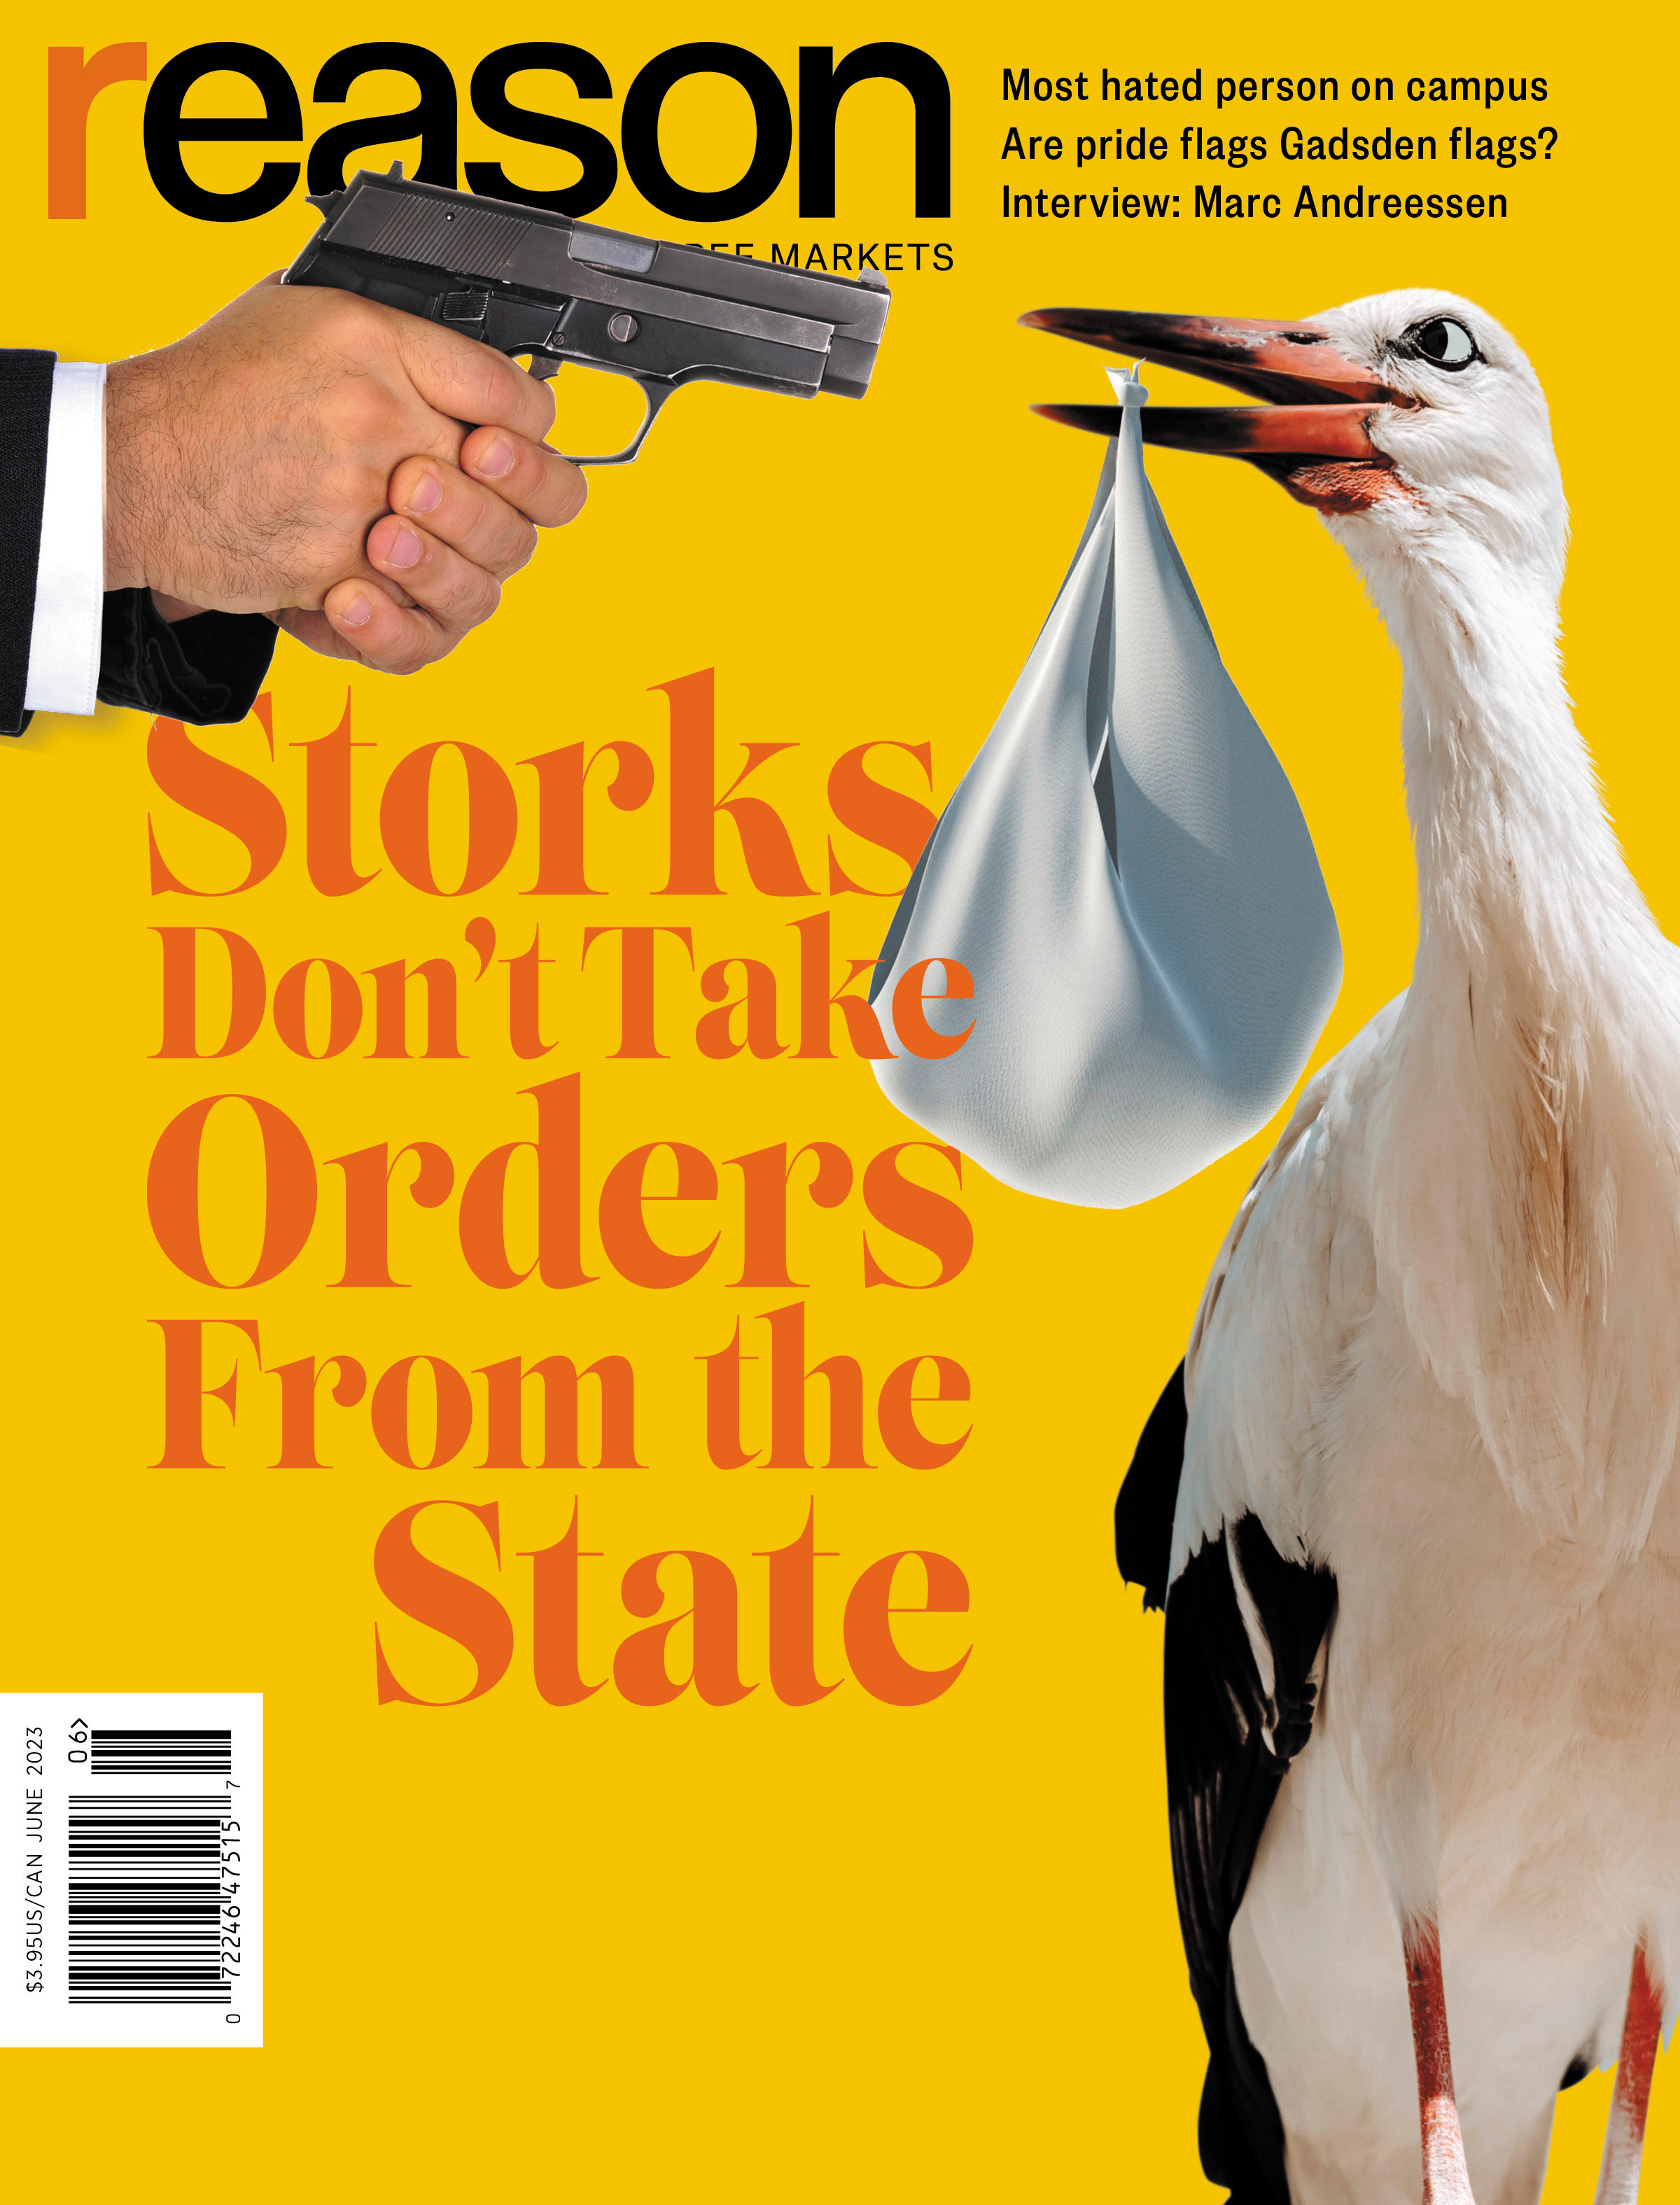 [Buy this magazine or the bird gets it]